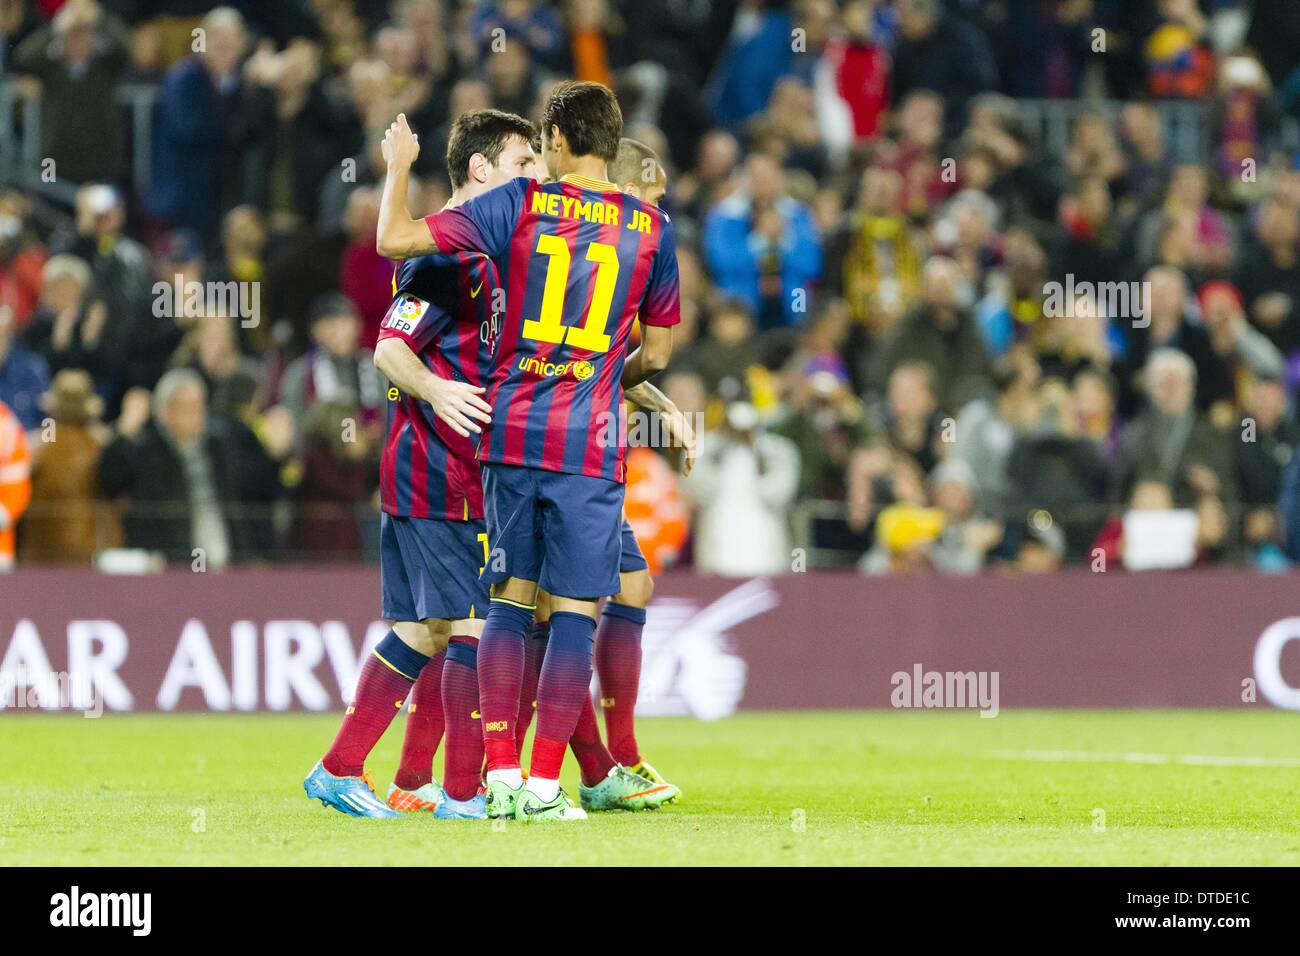 Barcellona, Spain. 15th Feb, 2014. BARCELONA - 15 of february - ESPANA: Neymar and Leo Messi celebrating the goal during the match of the rounnd 24 of Liga BBVA between FC Barcelona and Rayo Vallecano, played at Camp Nou stadium, saturday, 15 of february of 2014. Credit:  Mikel Trigueros/NurPhoto/ZUMAPRESS.com/Alamy Live News Stock Photo